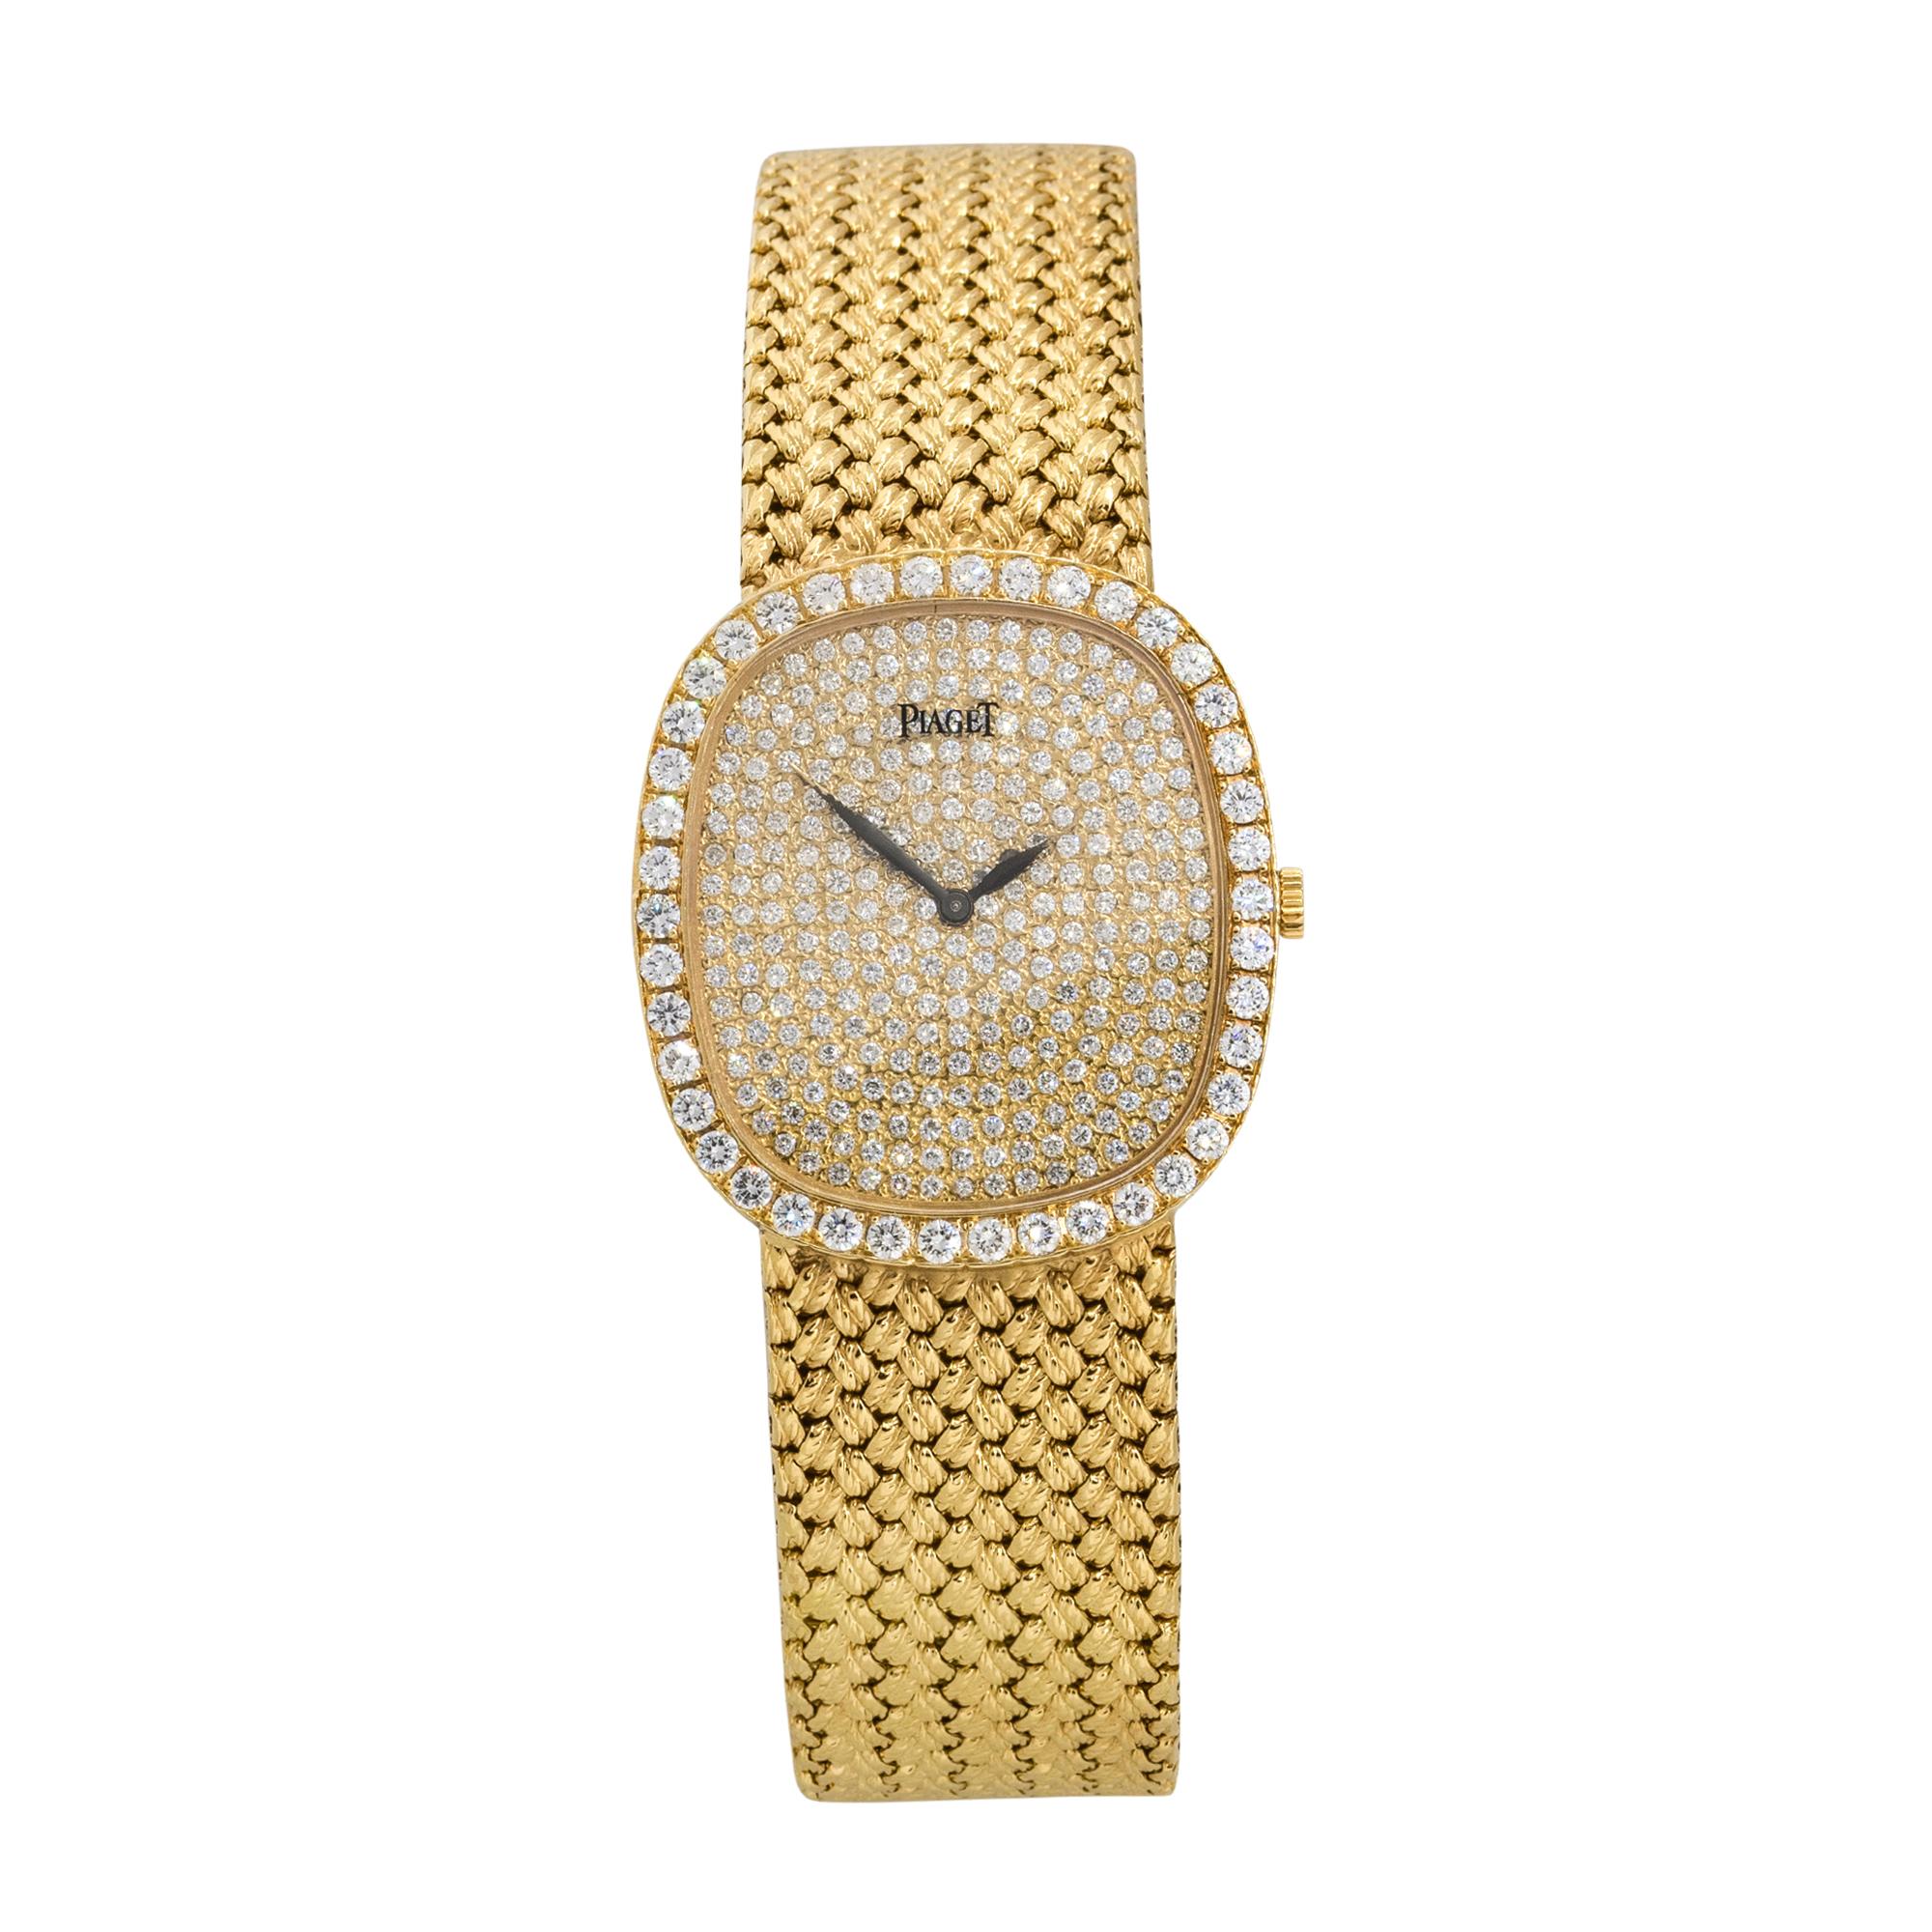 Brand: Piaget
Case Material: 18k Yellow Gold
Case Diameter: 29mm
Crystal: Sapphire Crystal
Bezel: 18k Yellow gold bezel with Diamonds
Dial: All Diamond dial with Black hands
Bracelet: 18k Yellow Gold
Size: Will fit a 7.5